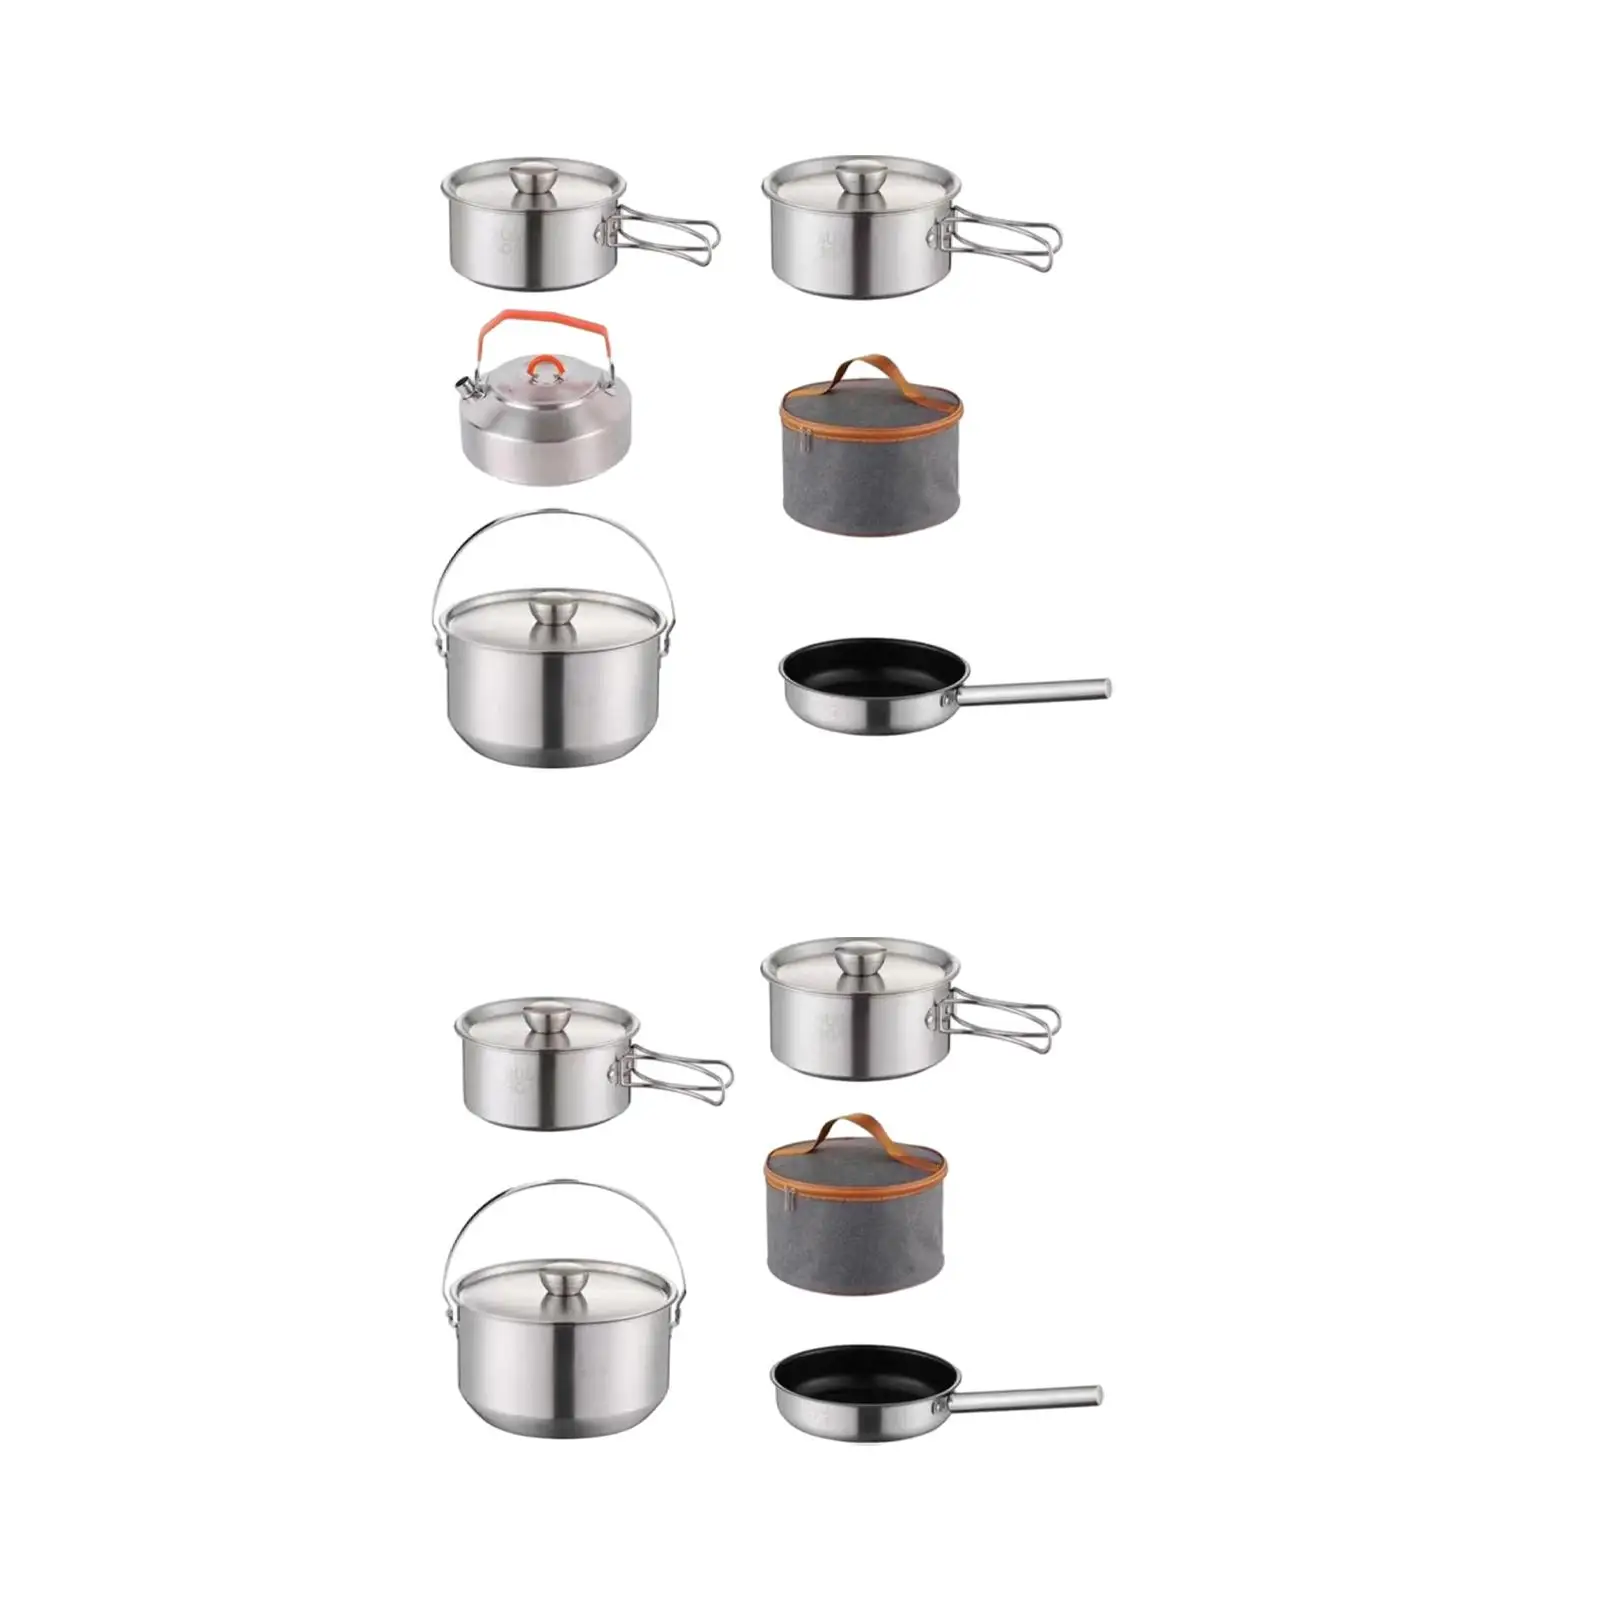 Camping Cookware Kit Outdoor Pot Nonstick Portable Utensils Cookset Cooking Set for Travel Backpacking Kitchen Indoors Hiking